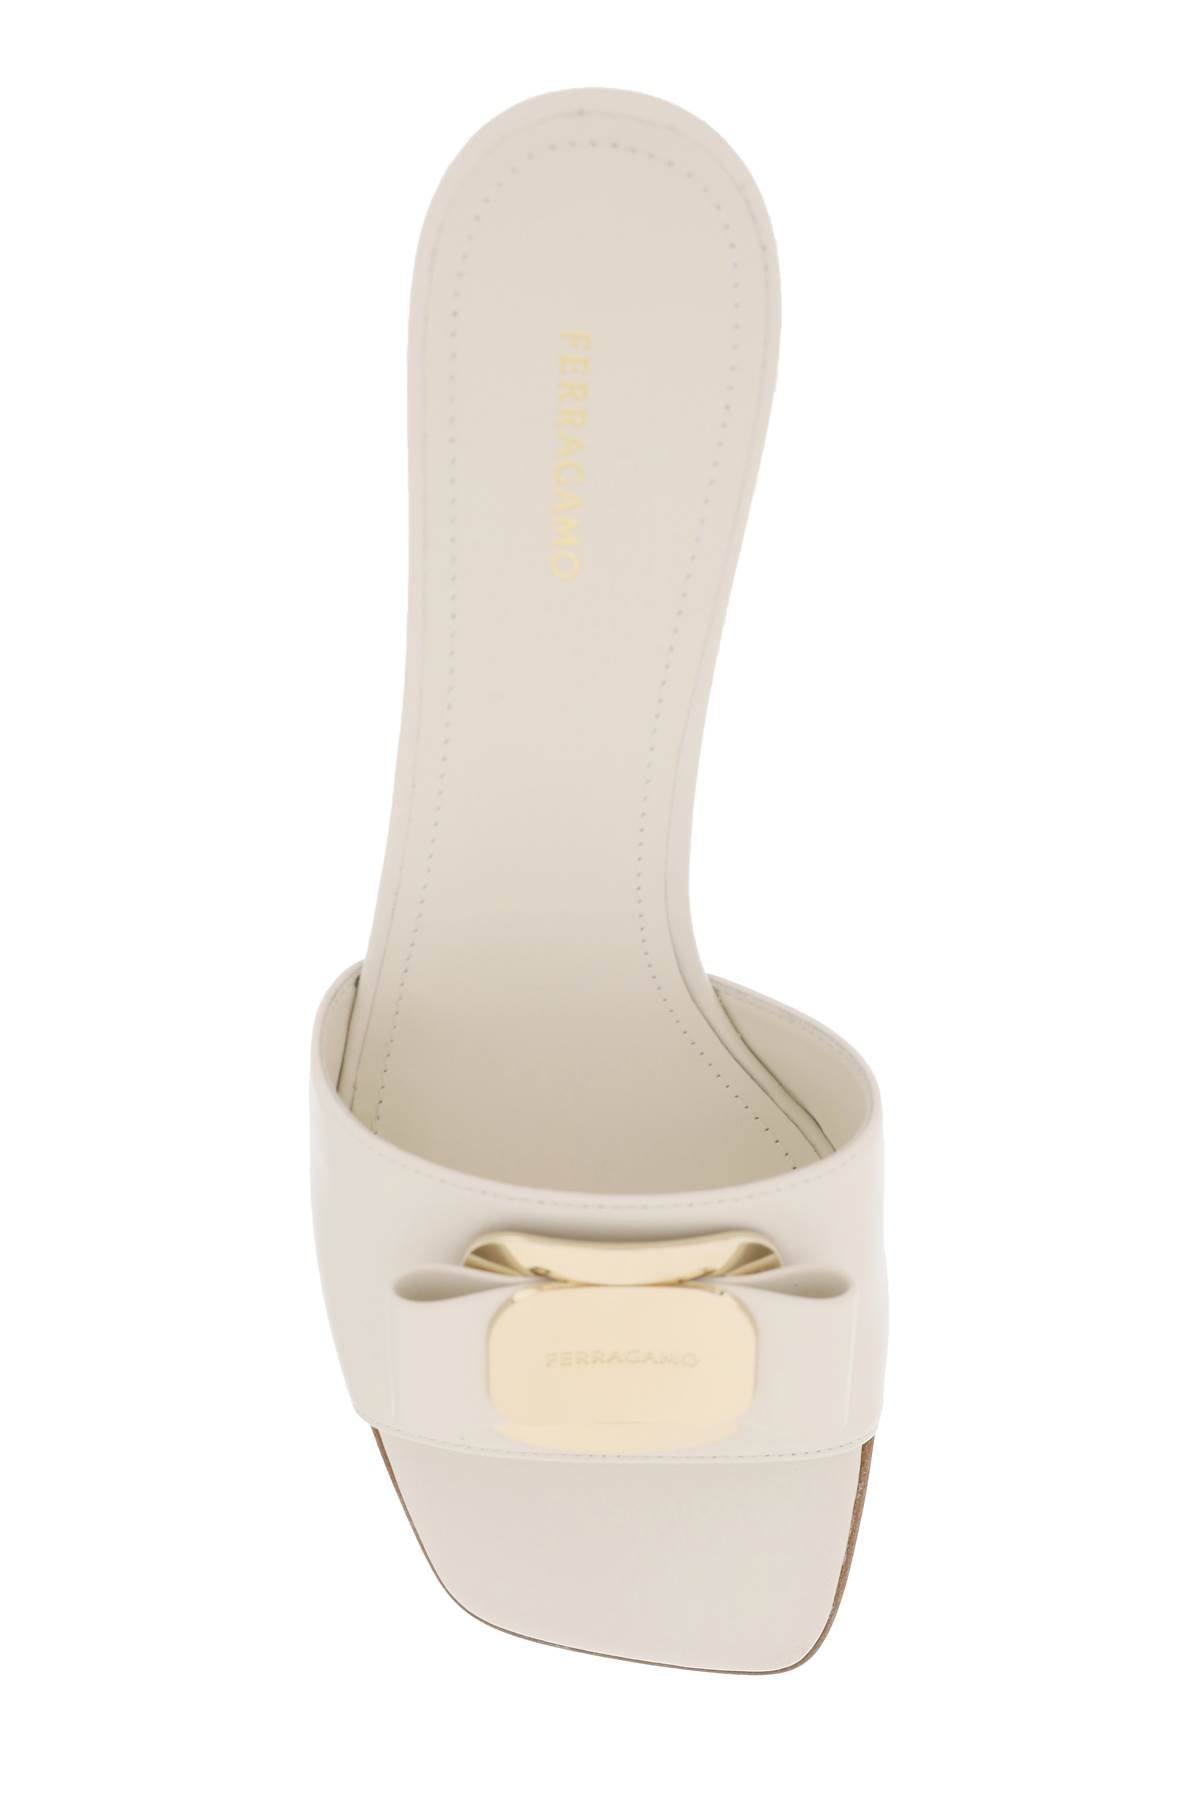 FERRAGAMO Bow-accented Nappa Leather Flat Sandals for Women